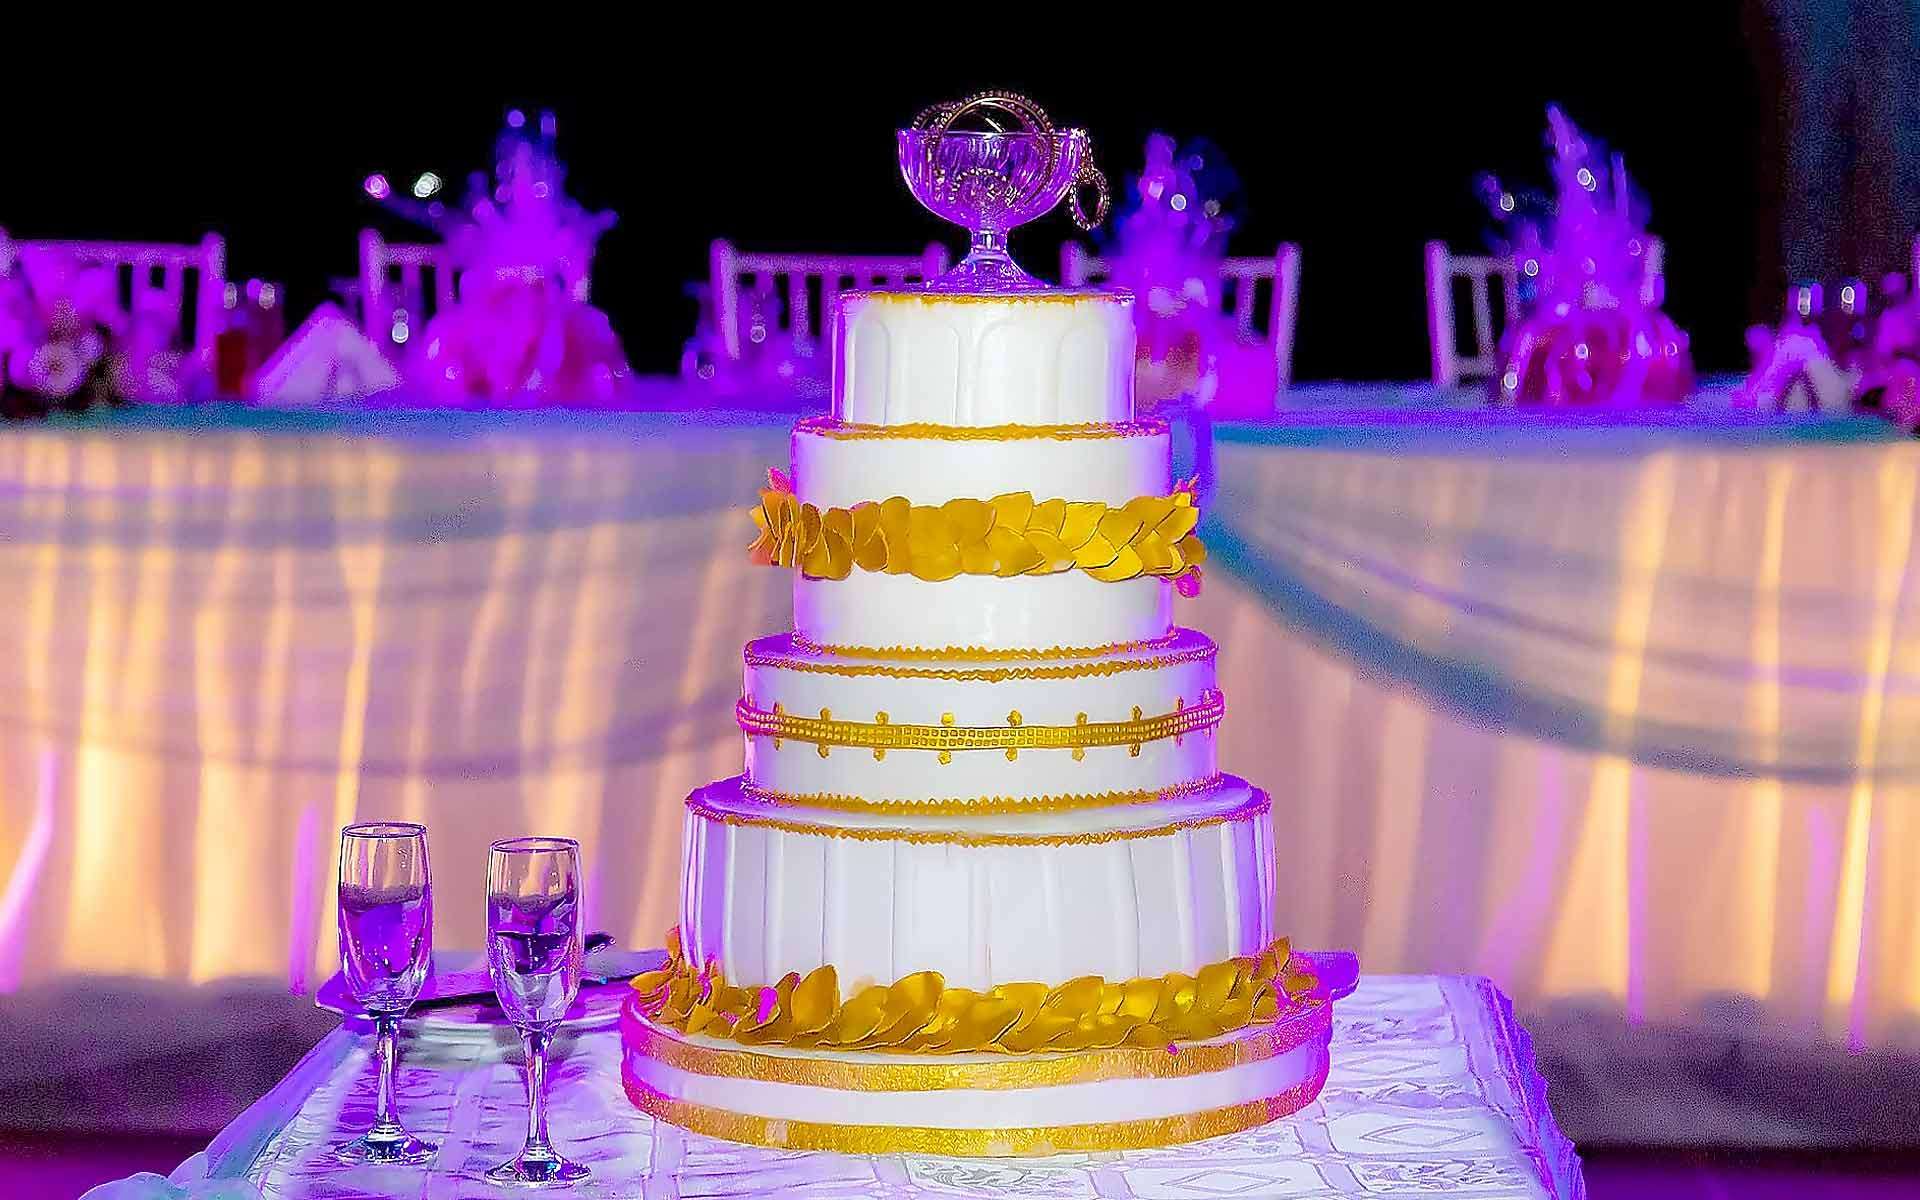 Golden-Leaf-Wedding-Cake-by-Diamond-Events-Wedding-Event-planning-services